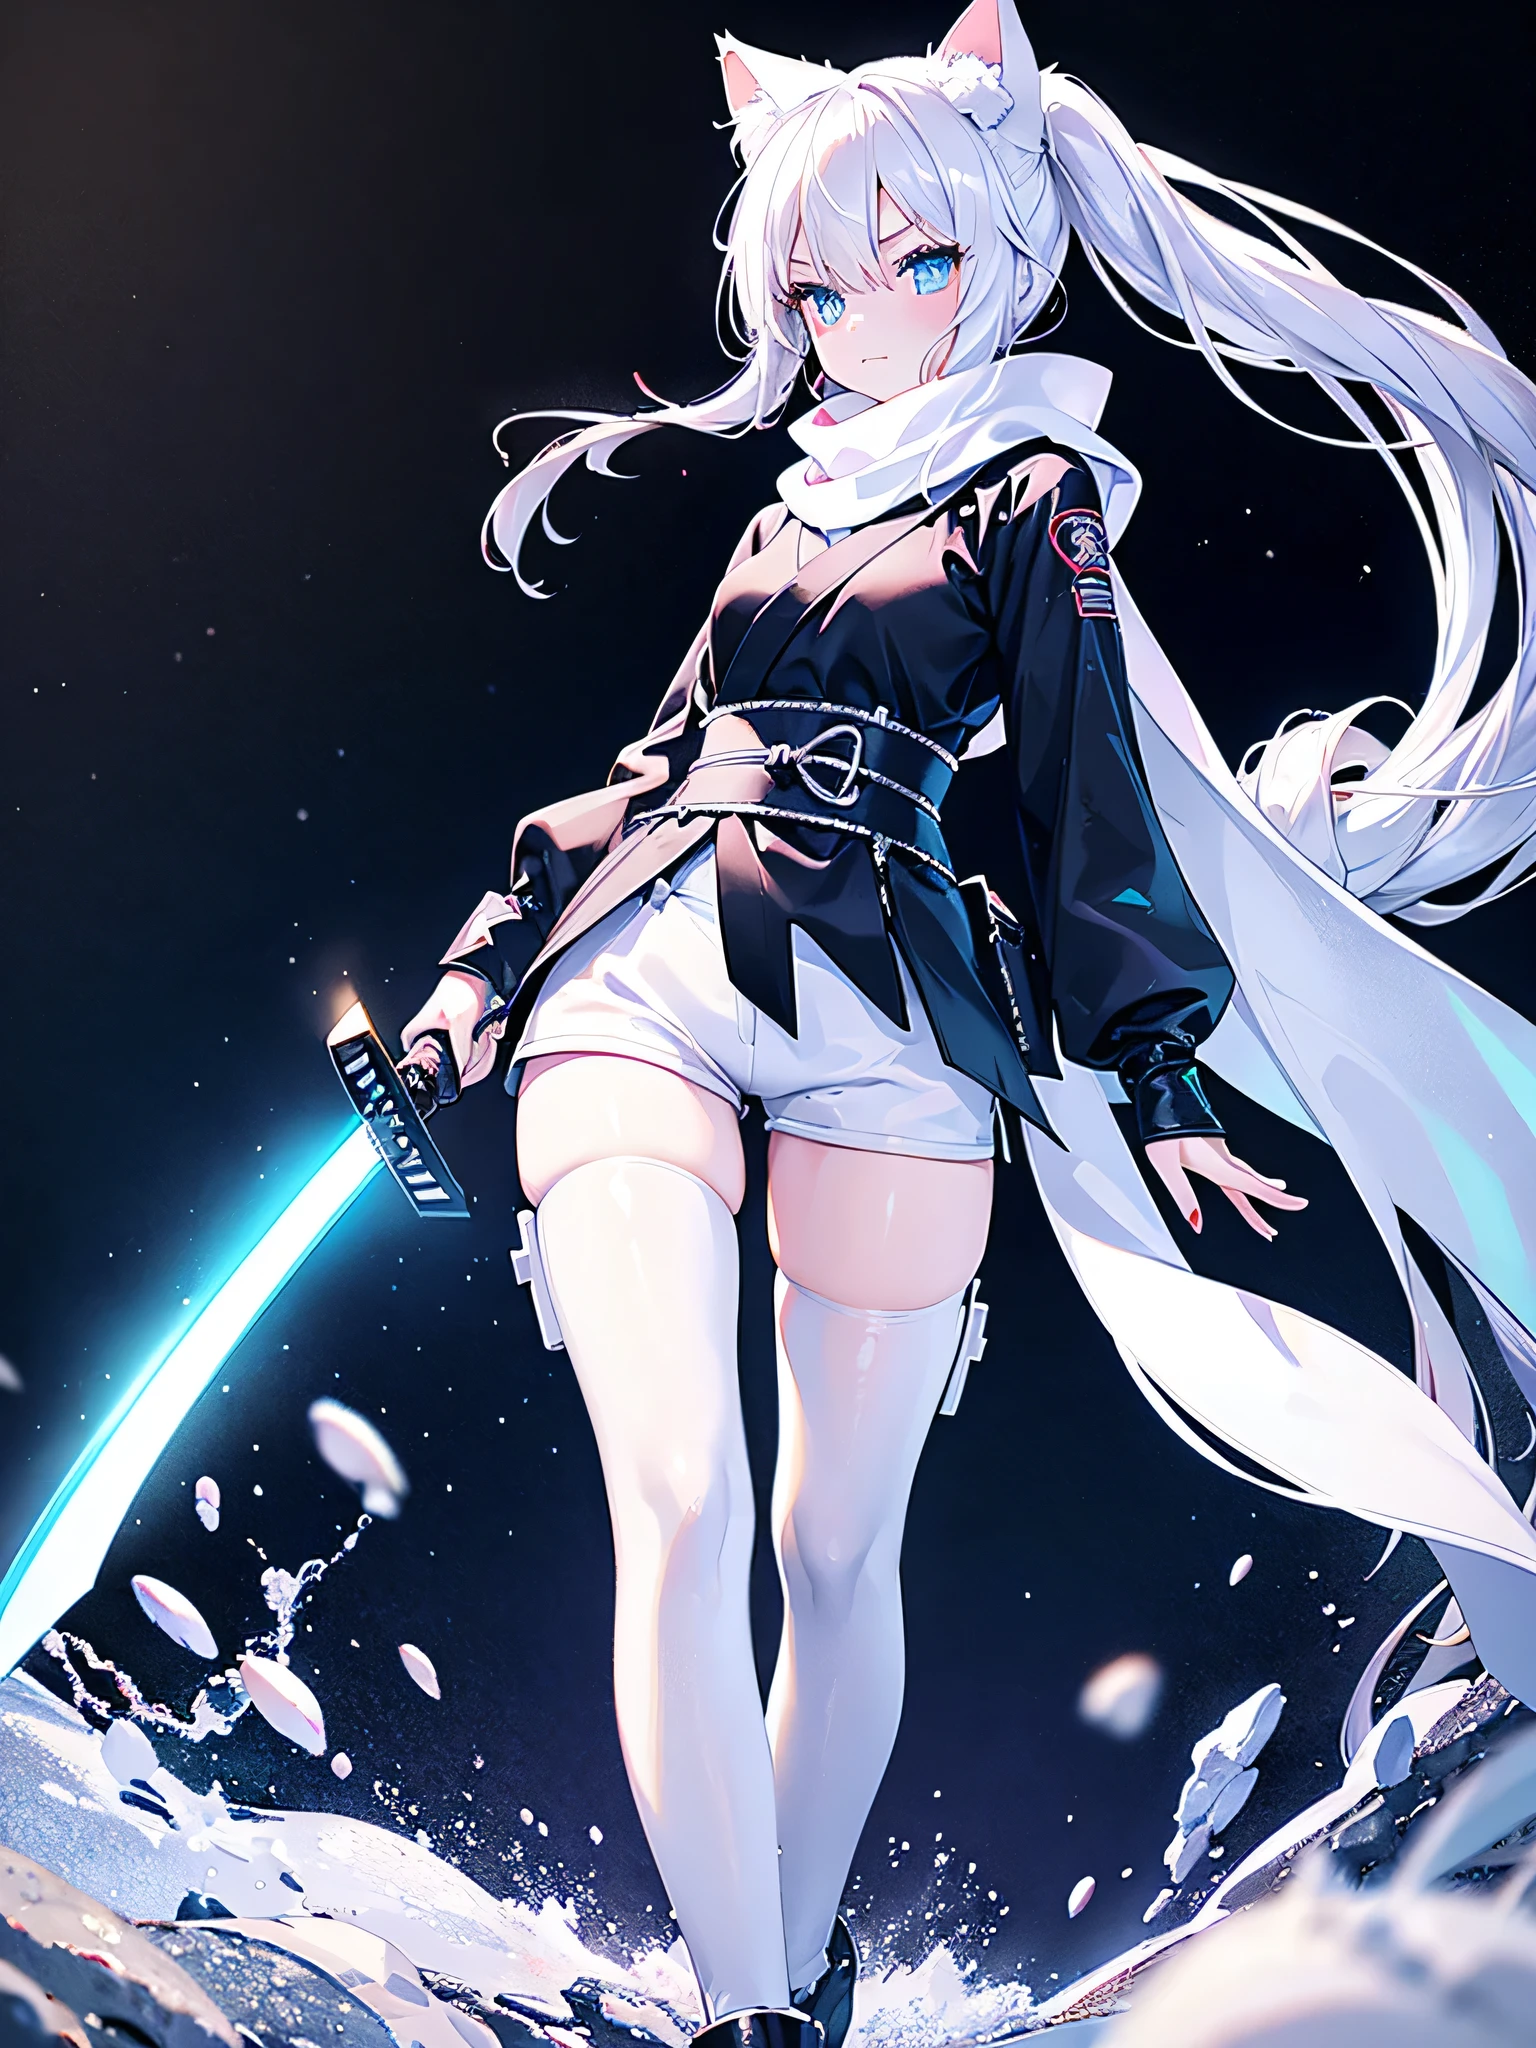 a beautiful girl with sparkling eyes,  long white hair, white cat ears, blue eyes, wearing a scarf and hot pants, in a post-apocalyptic world, futuristic neon environment, holding a katana and ninja sword, samurai warrior